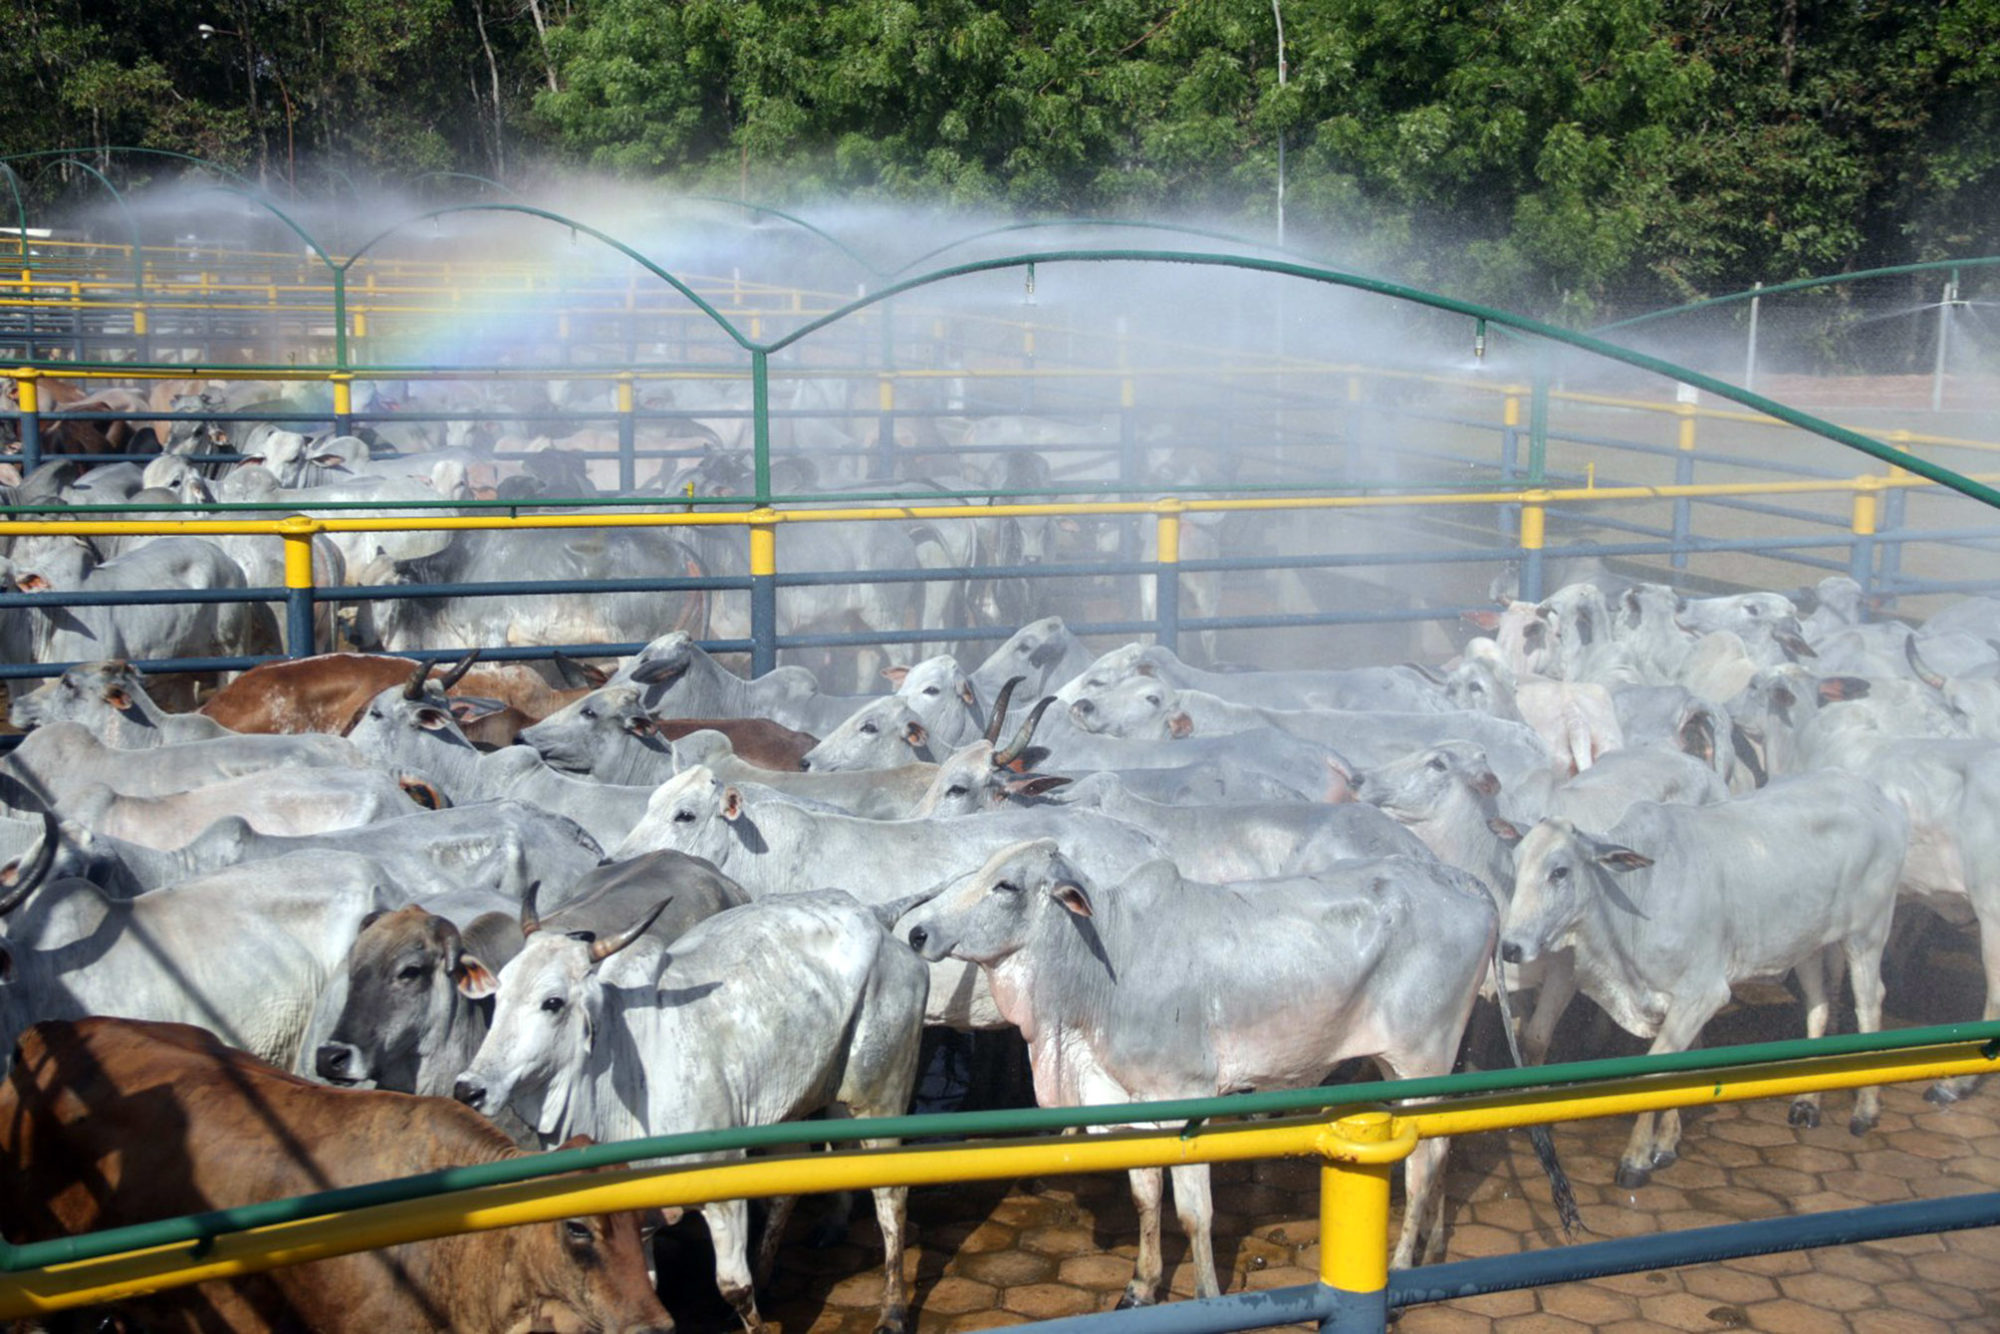 cattle farm in Xinguara in the state of Pará, Brazil.